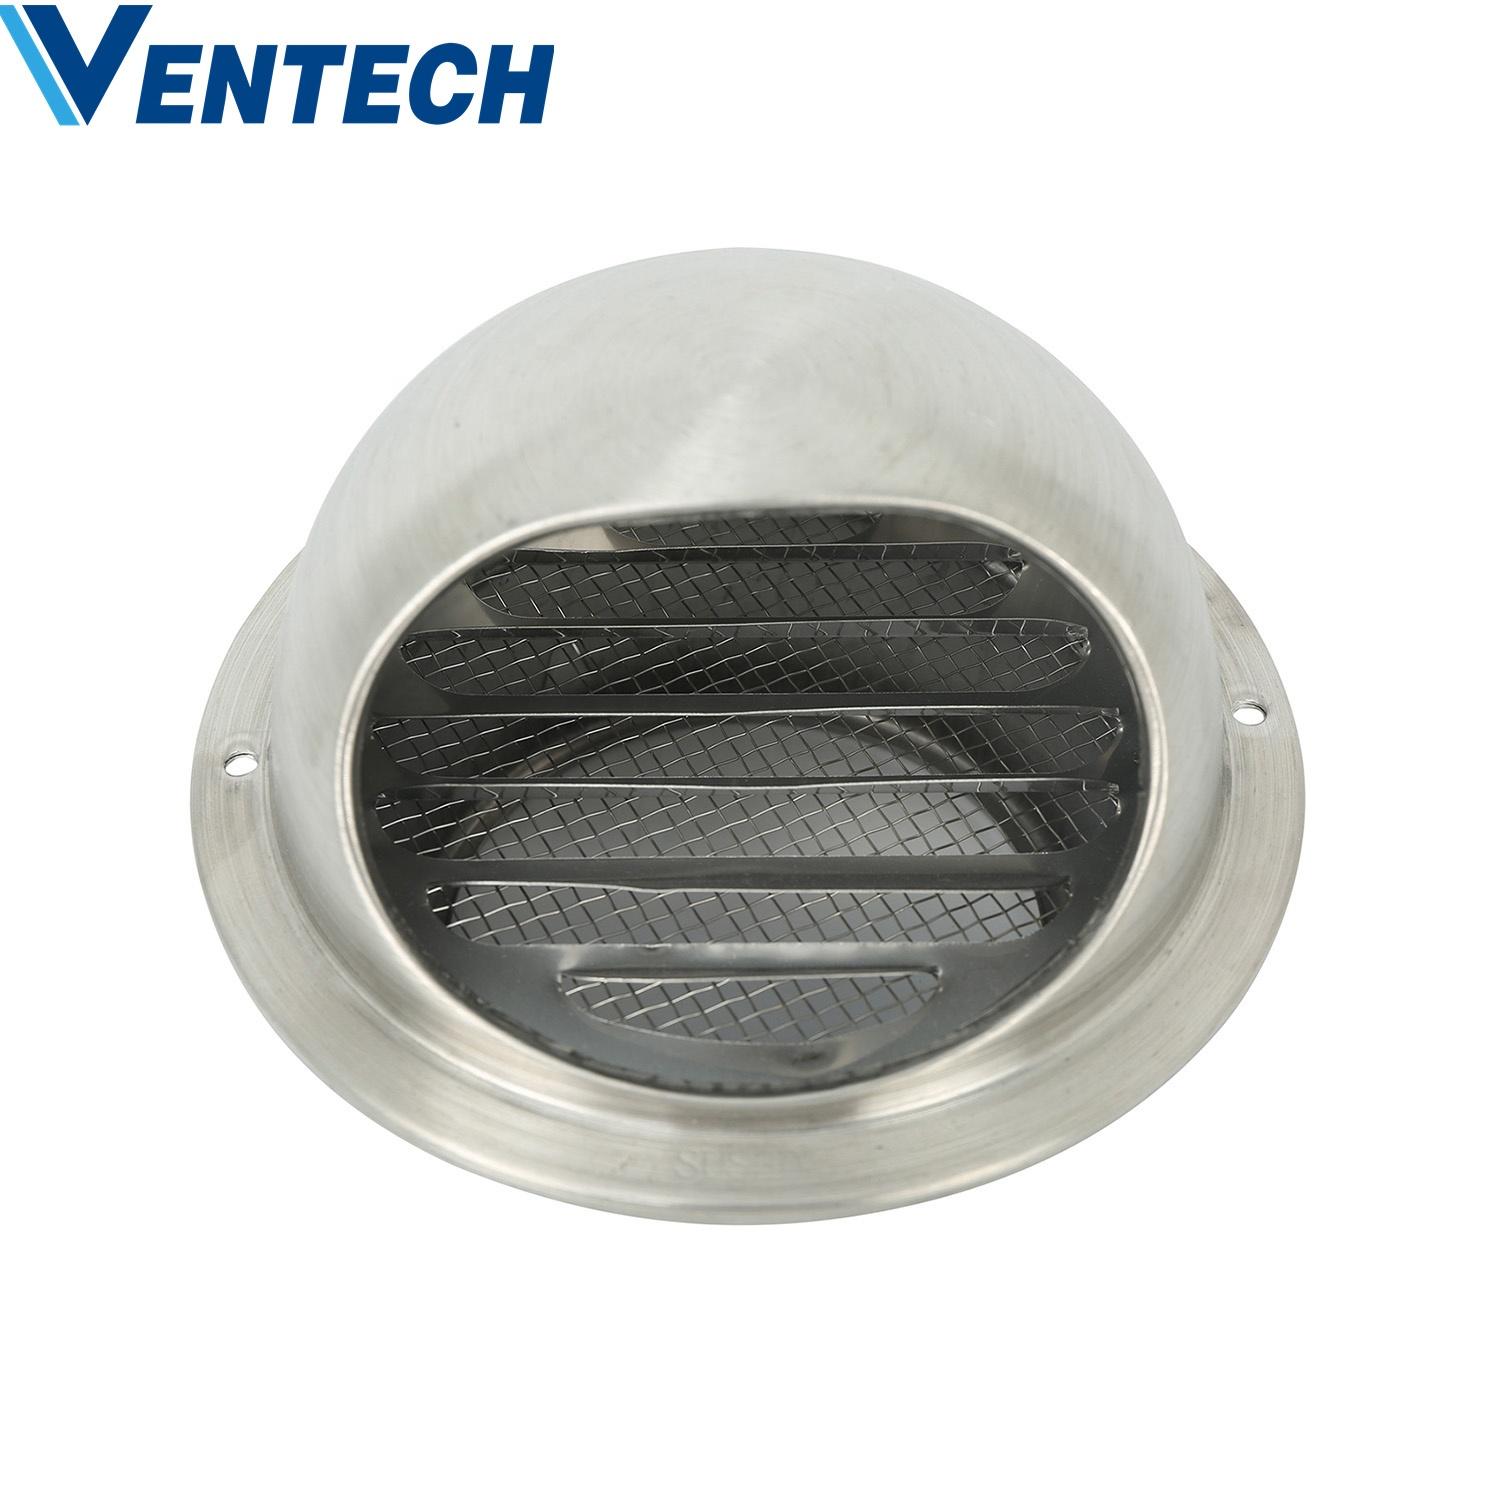 HVAC Wall Exhaust Air Louvers Stainless Steel Louver Waterproof Air Mushroom Vent Cover Weather Louver With Insect Screen Mesh